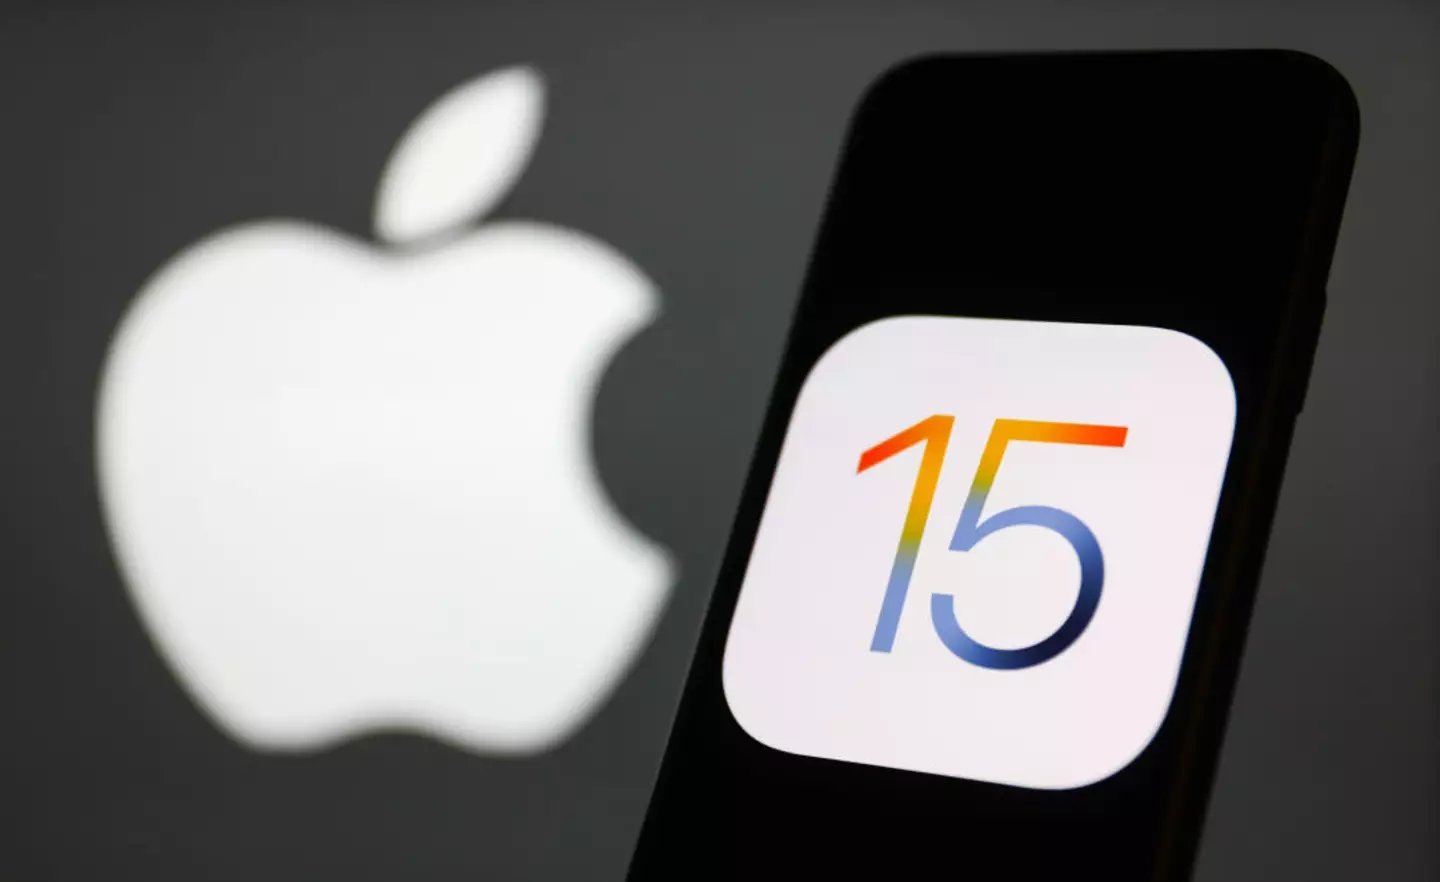 iPhone users will need to have IOS15, or newer updates, downloaded to their phone. (Jakub Porzycki/NurPhoto via Getty Images)